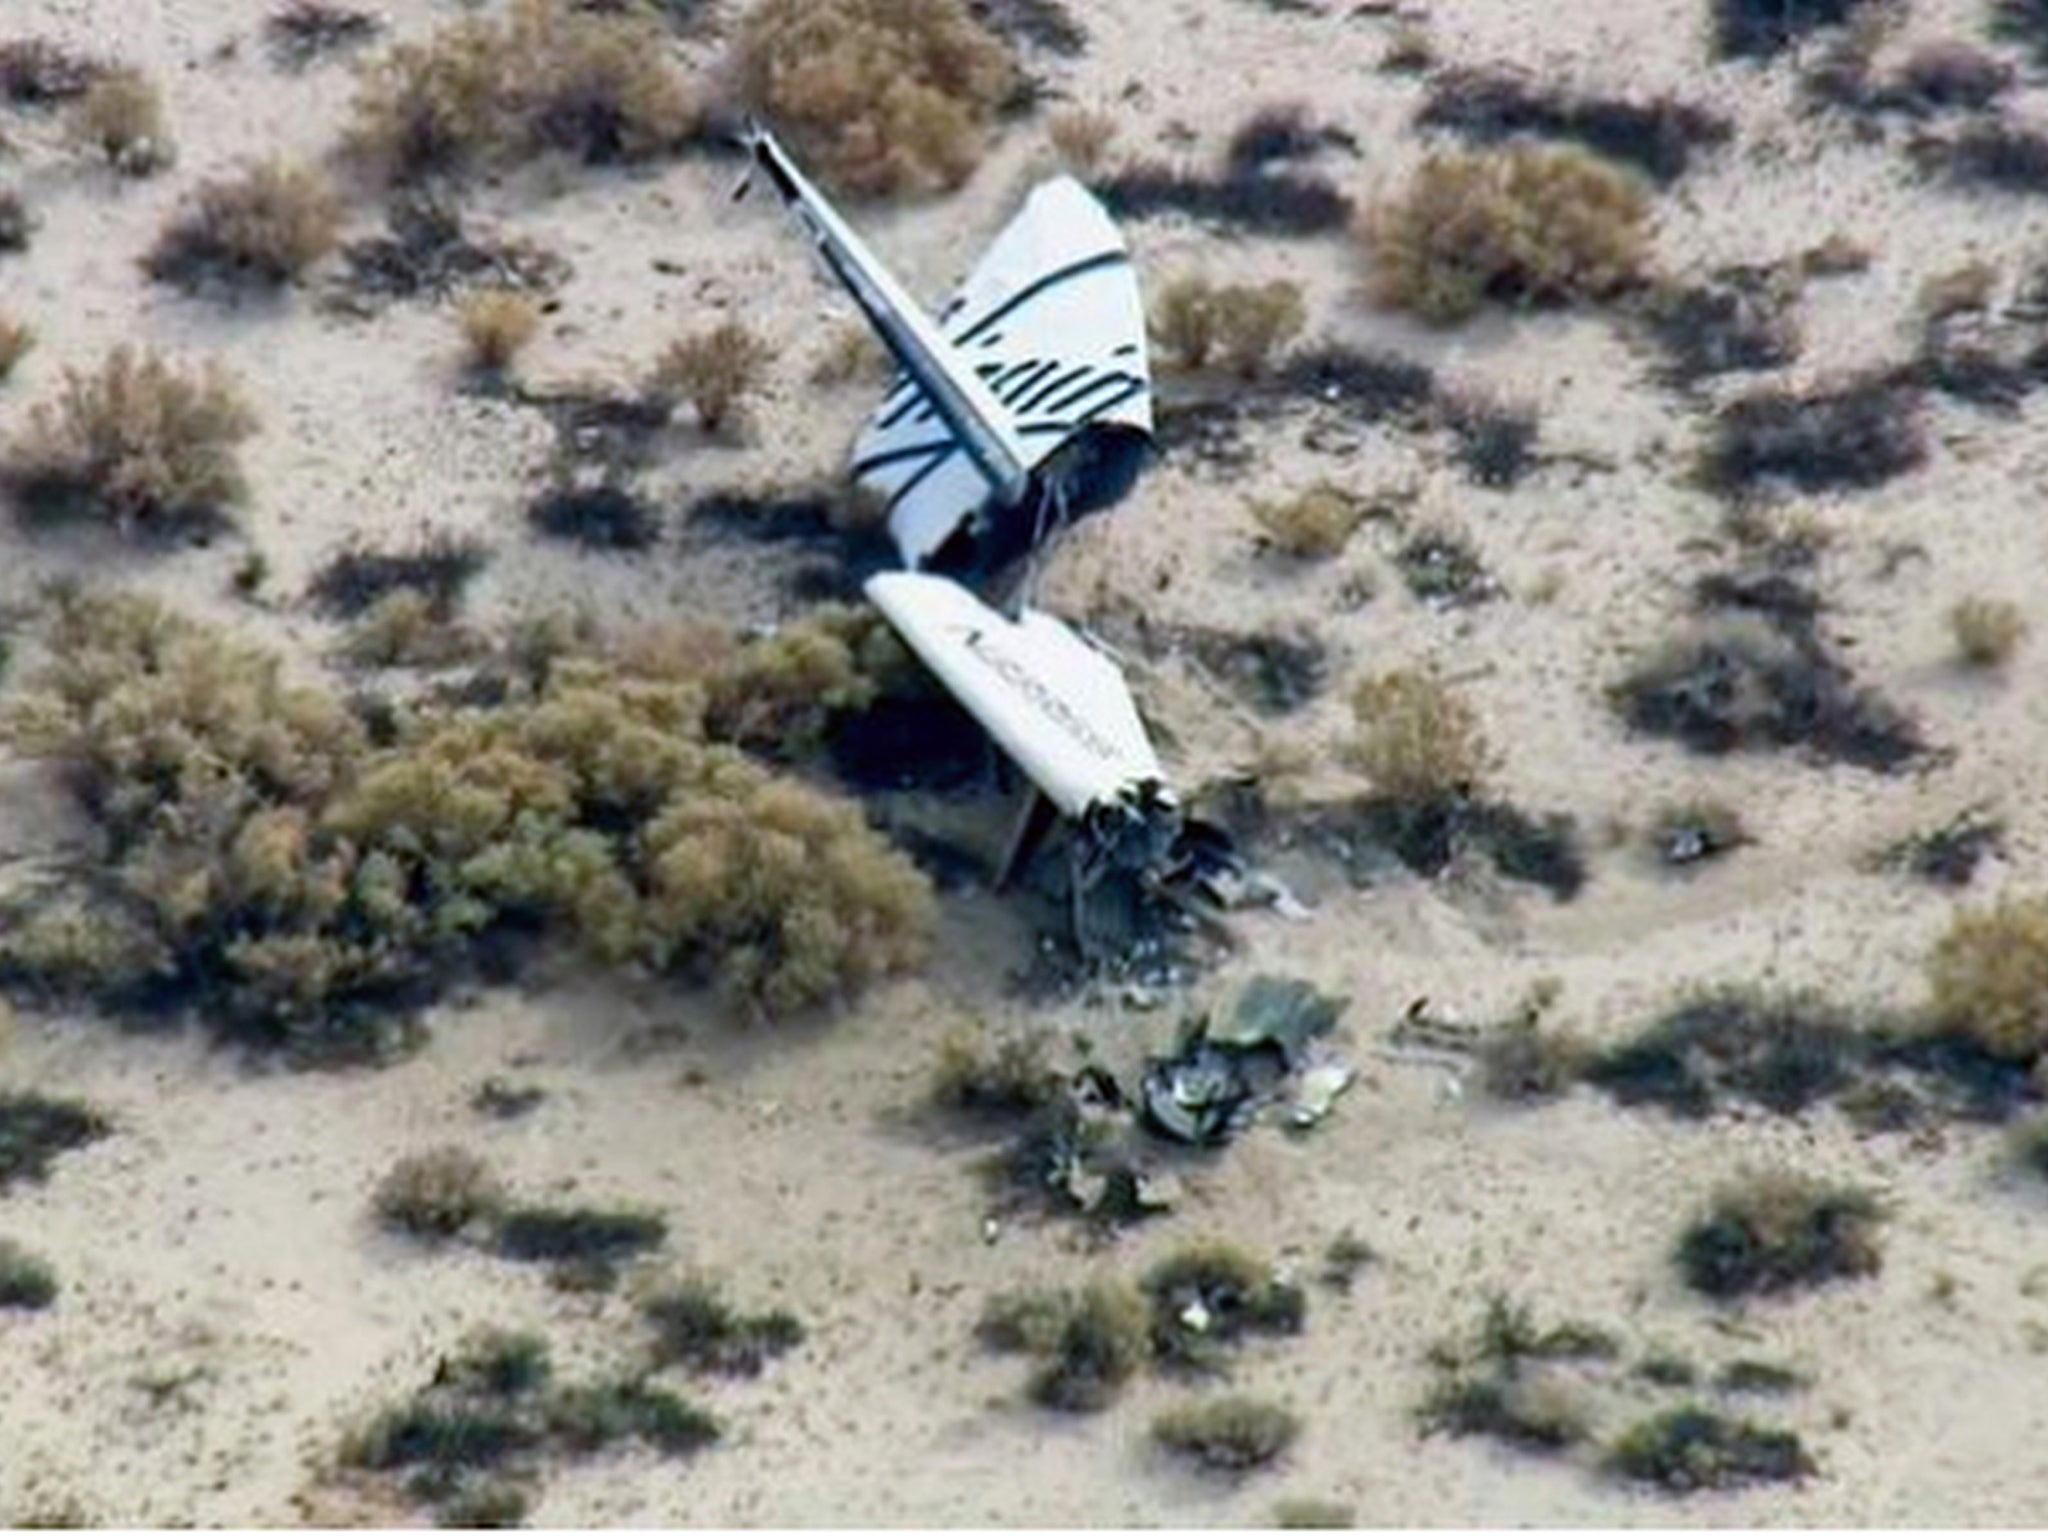 The wreckage of what is believed to be SpaceShipTwo in Southern California's Mojave Desert